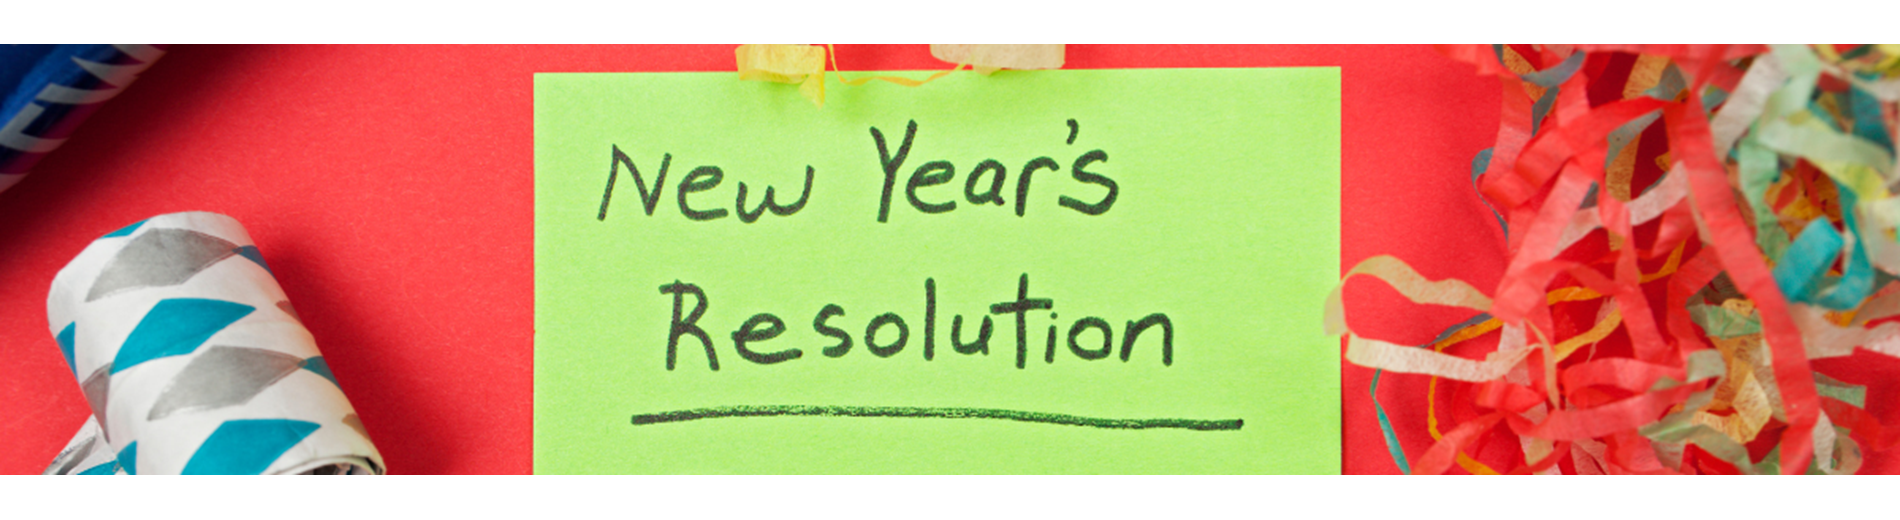 3 simple New Year’s resolutions that could save a child’s life